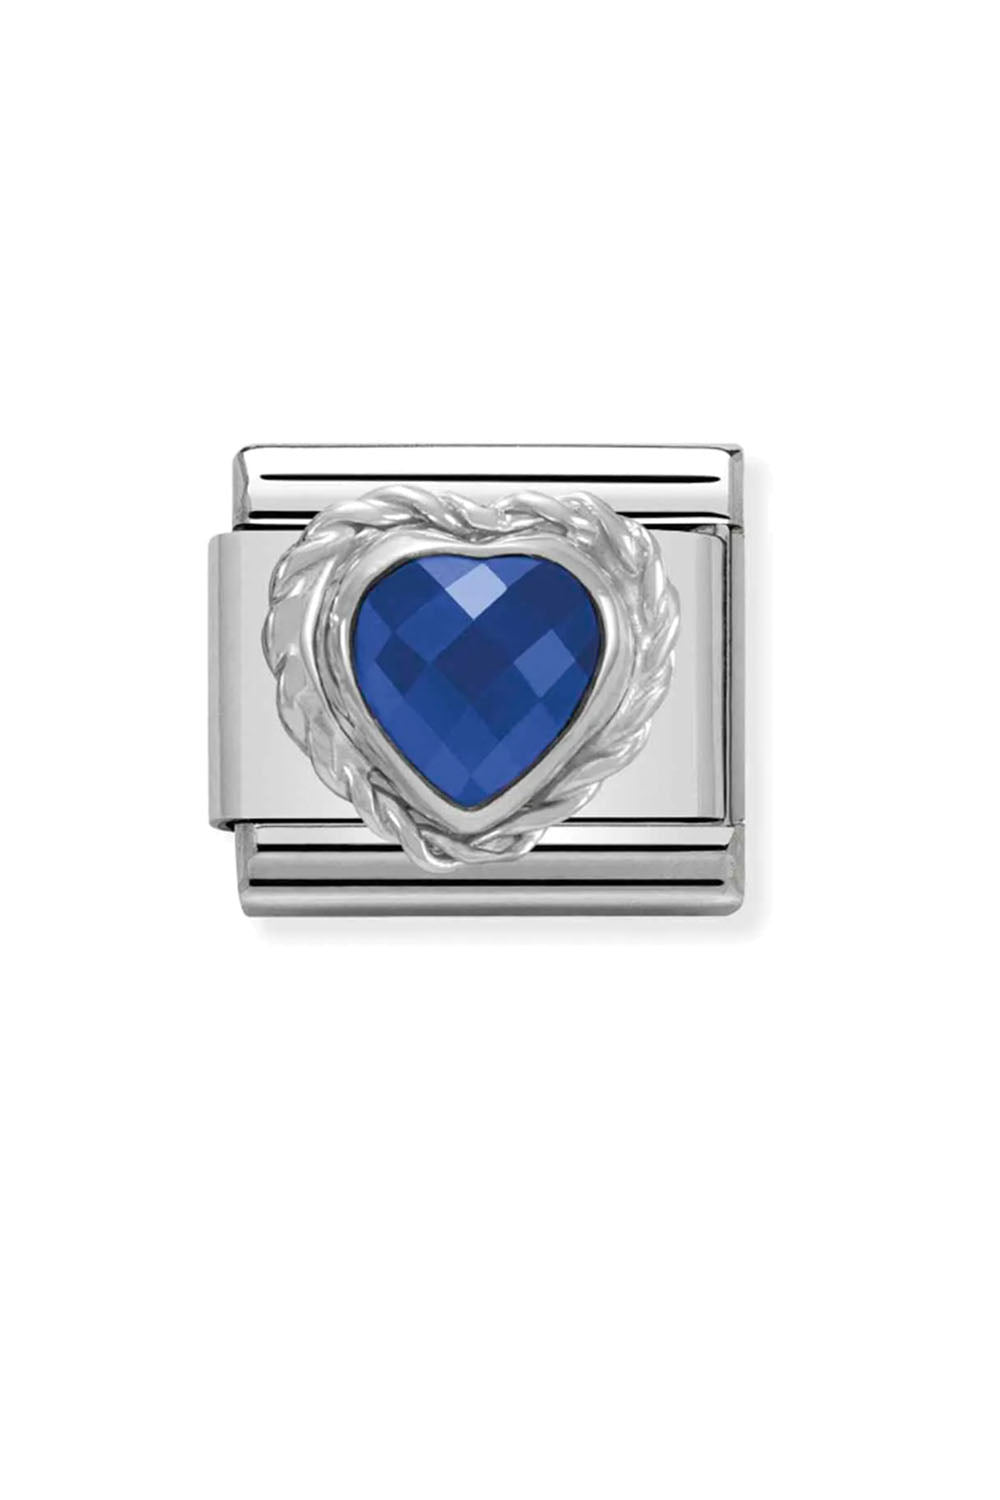 Heart faceted with 925 Sterling silver twisted setting and CZ blue